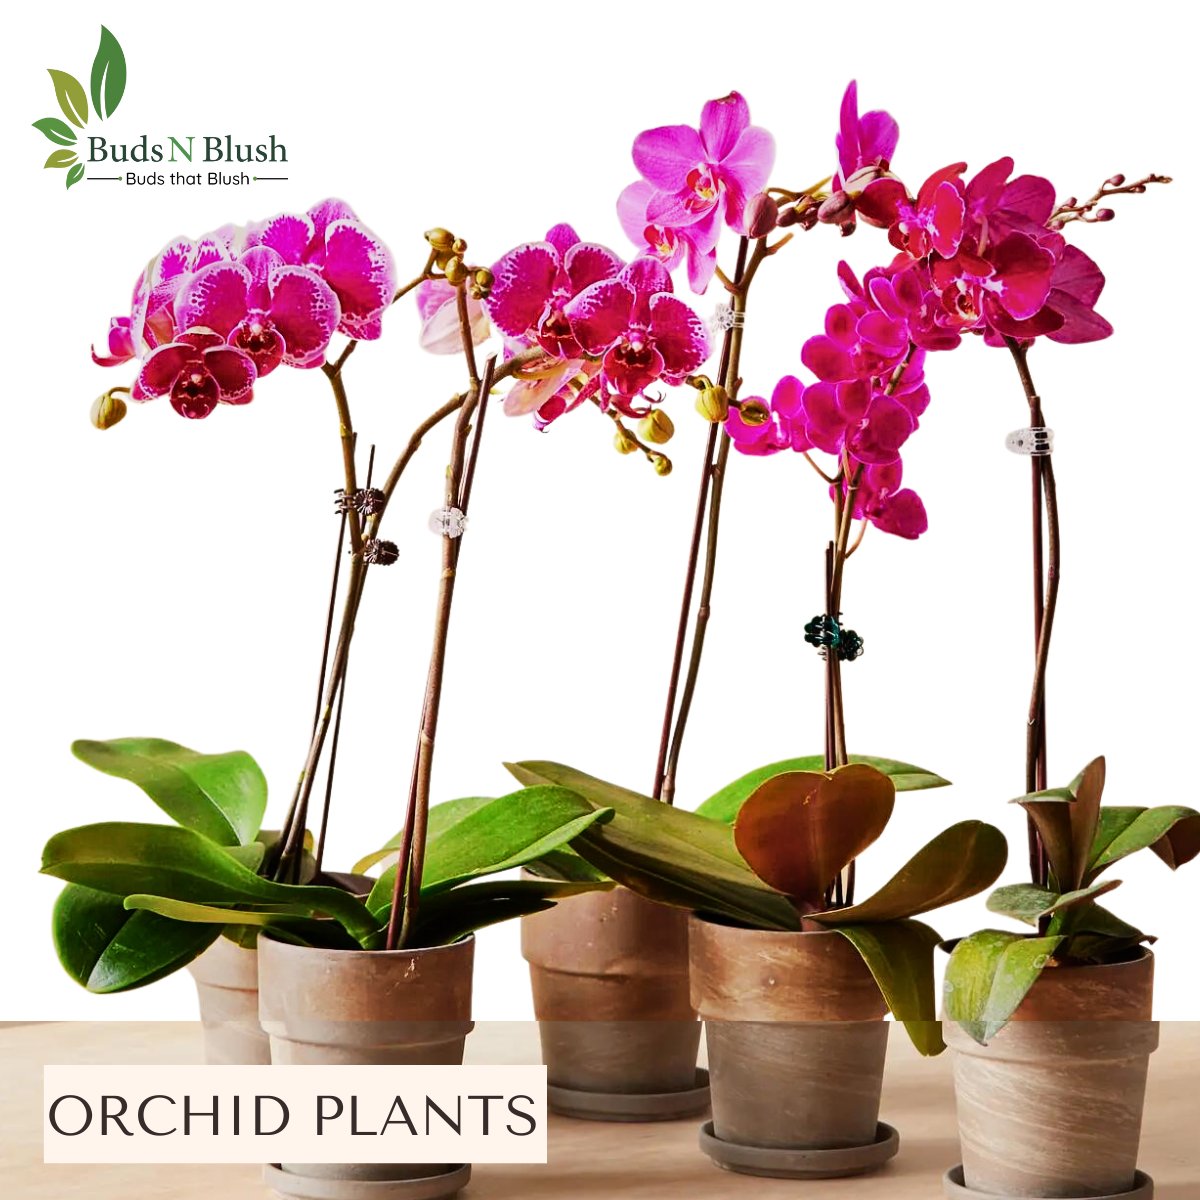 Most sort after plant of the world is now available at Budsnblush with more than 25 species to choose from hurry up and collect your orchid today